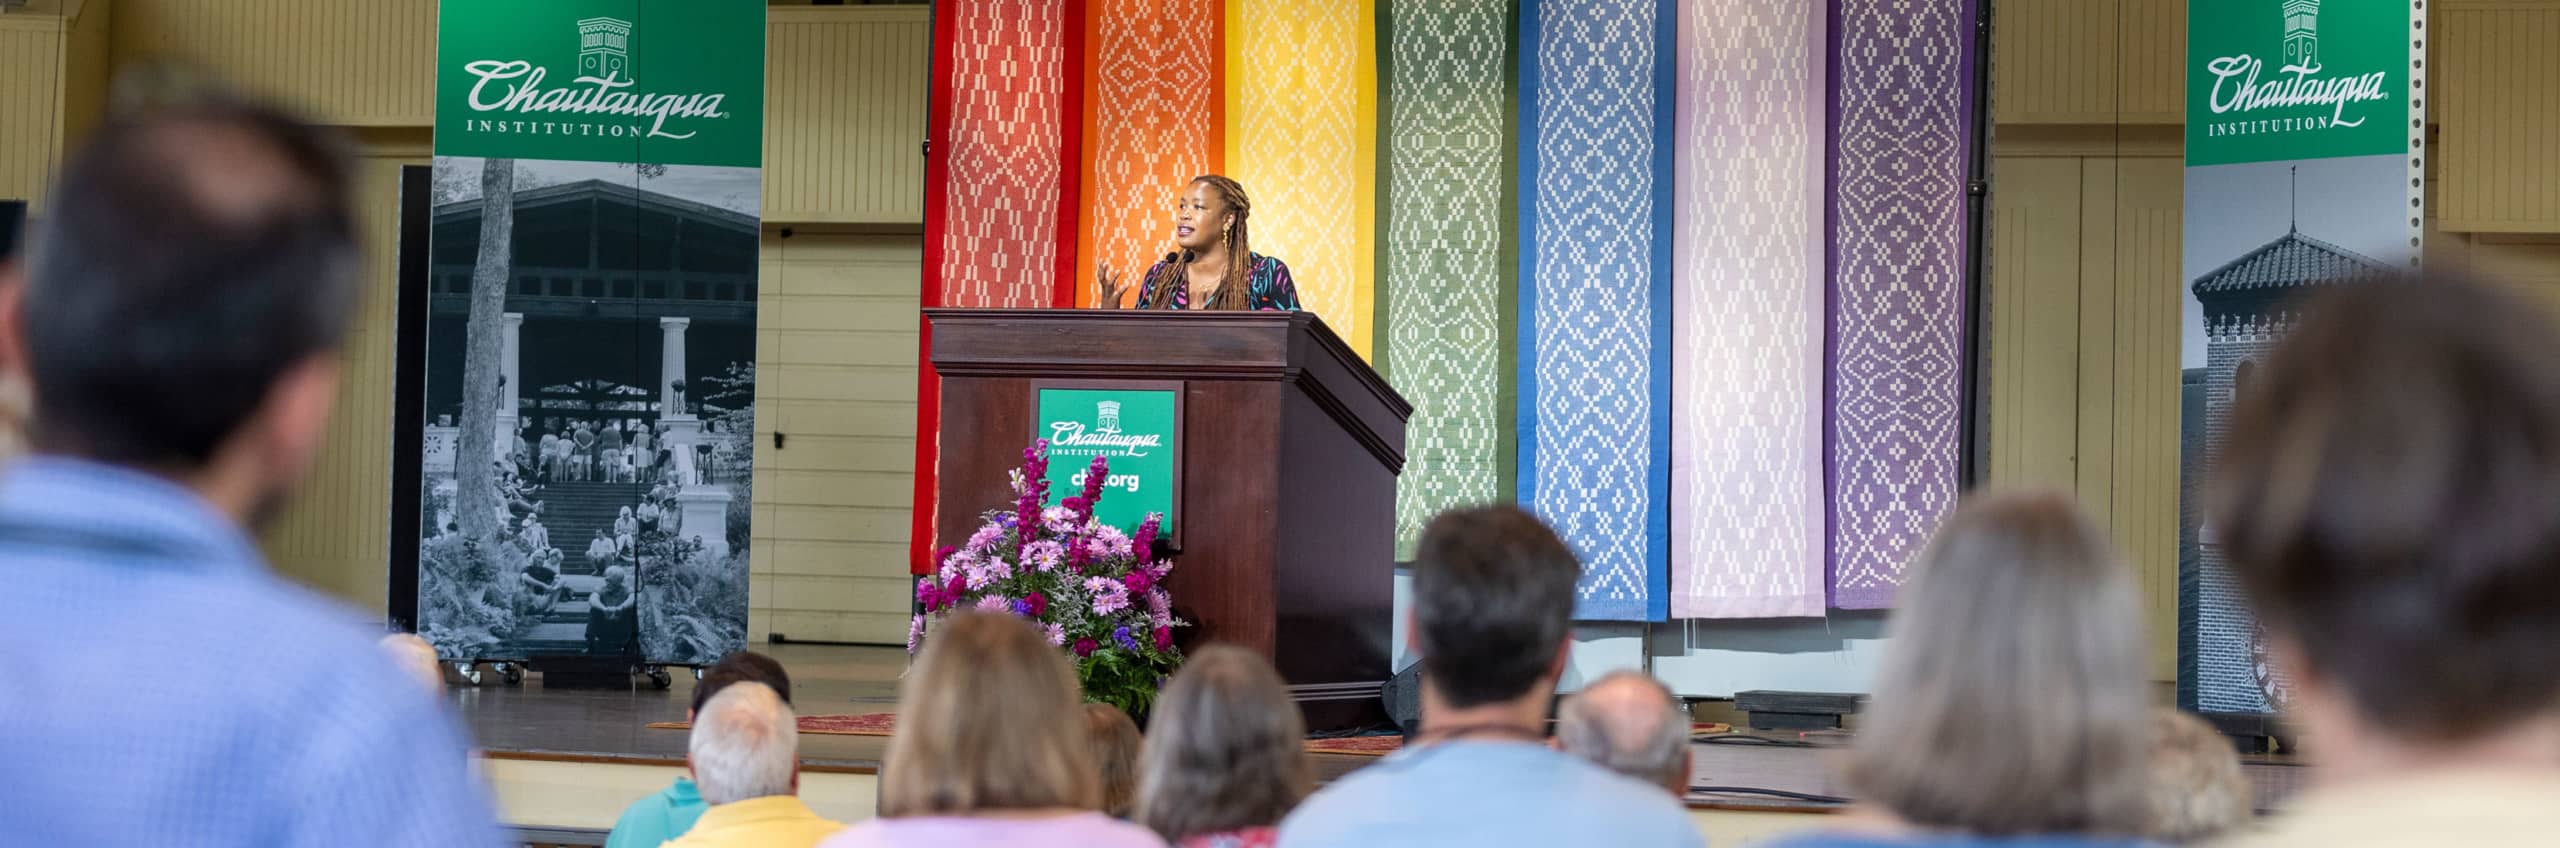 Heather McGhee giving an interfaith lecture